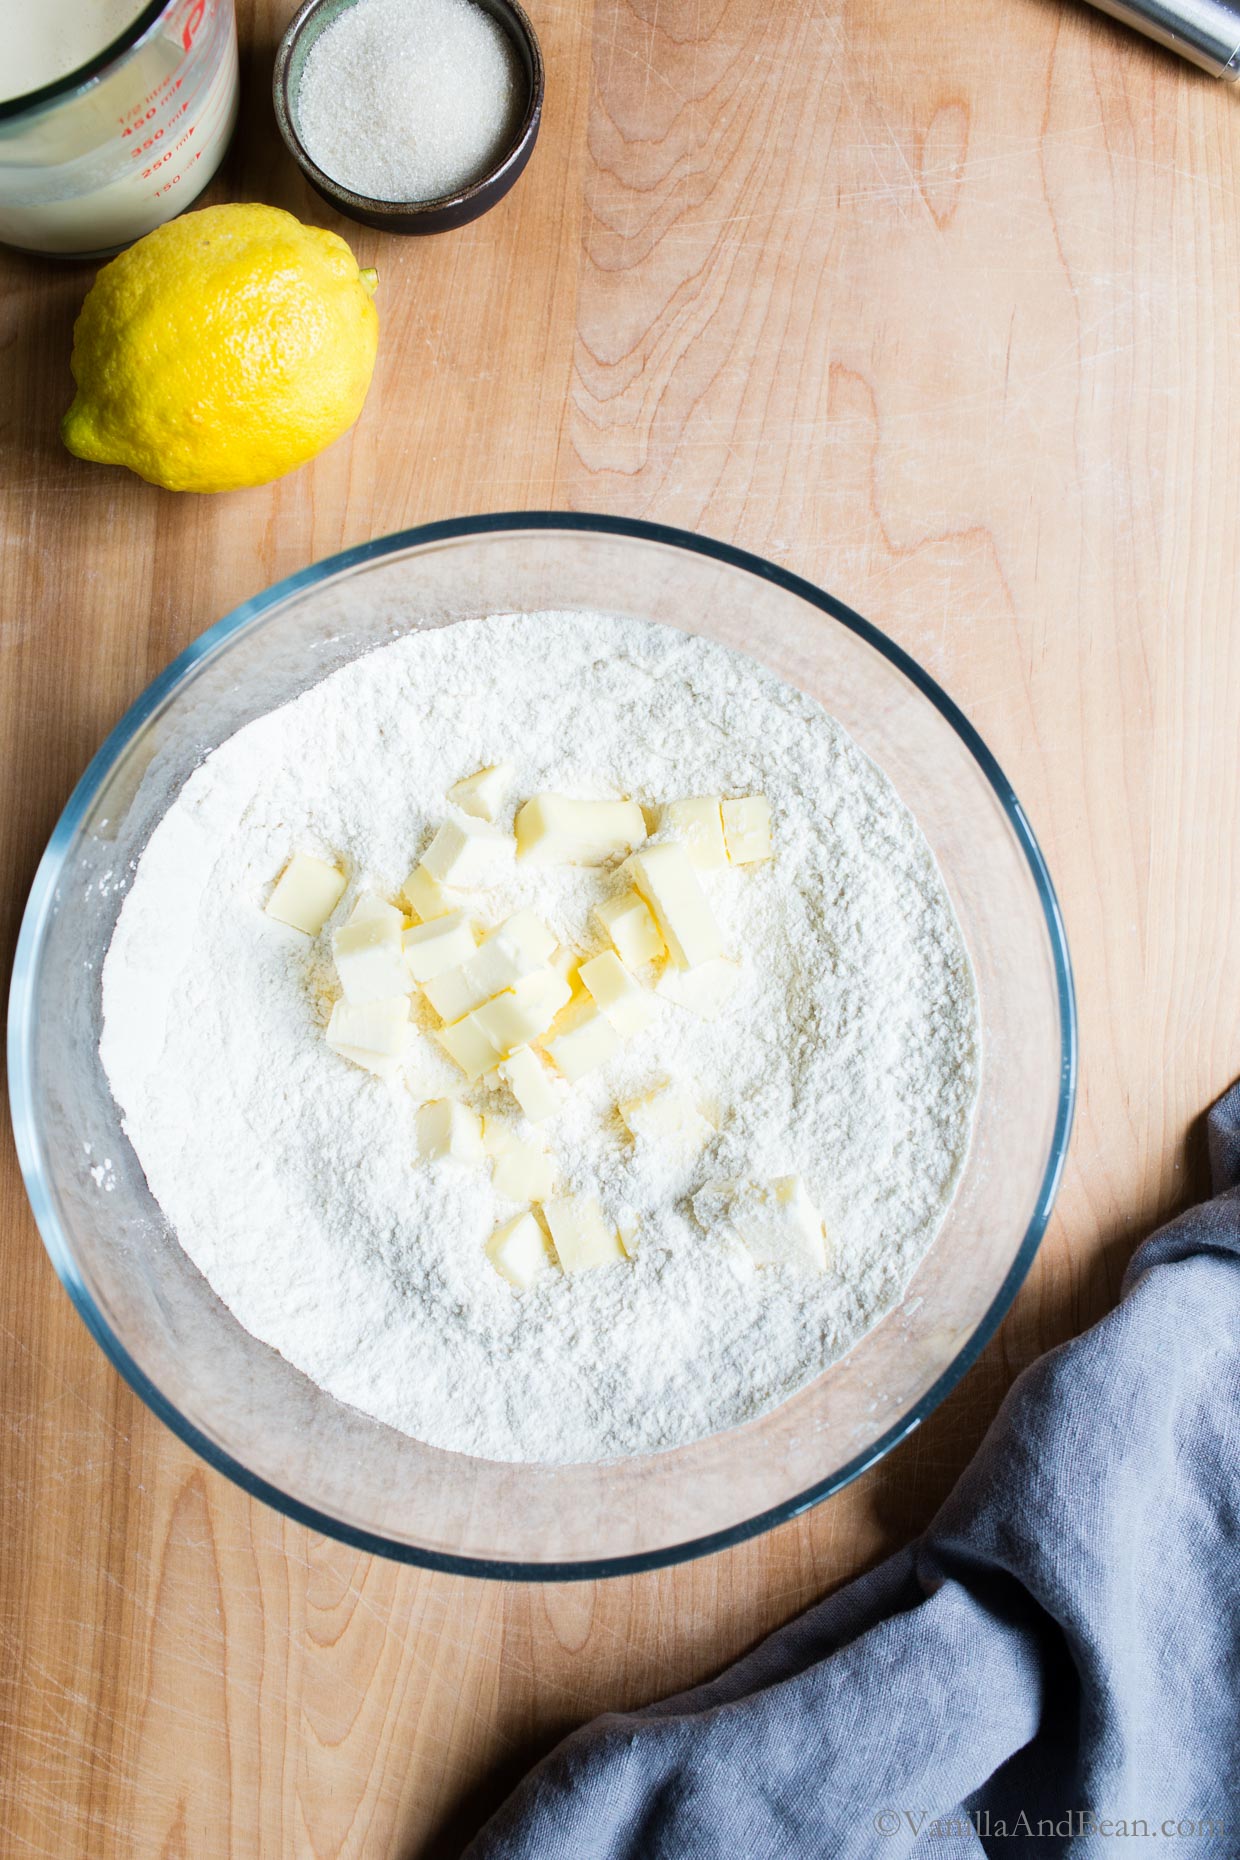 Diced butter in a bowl of flour.